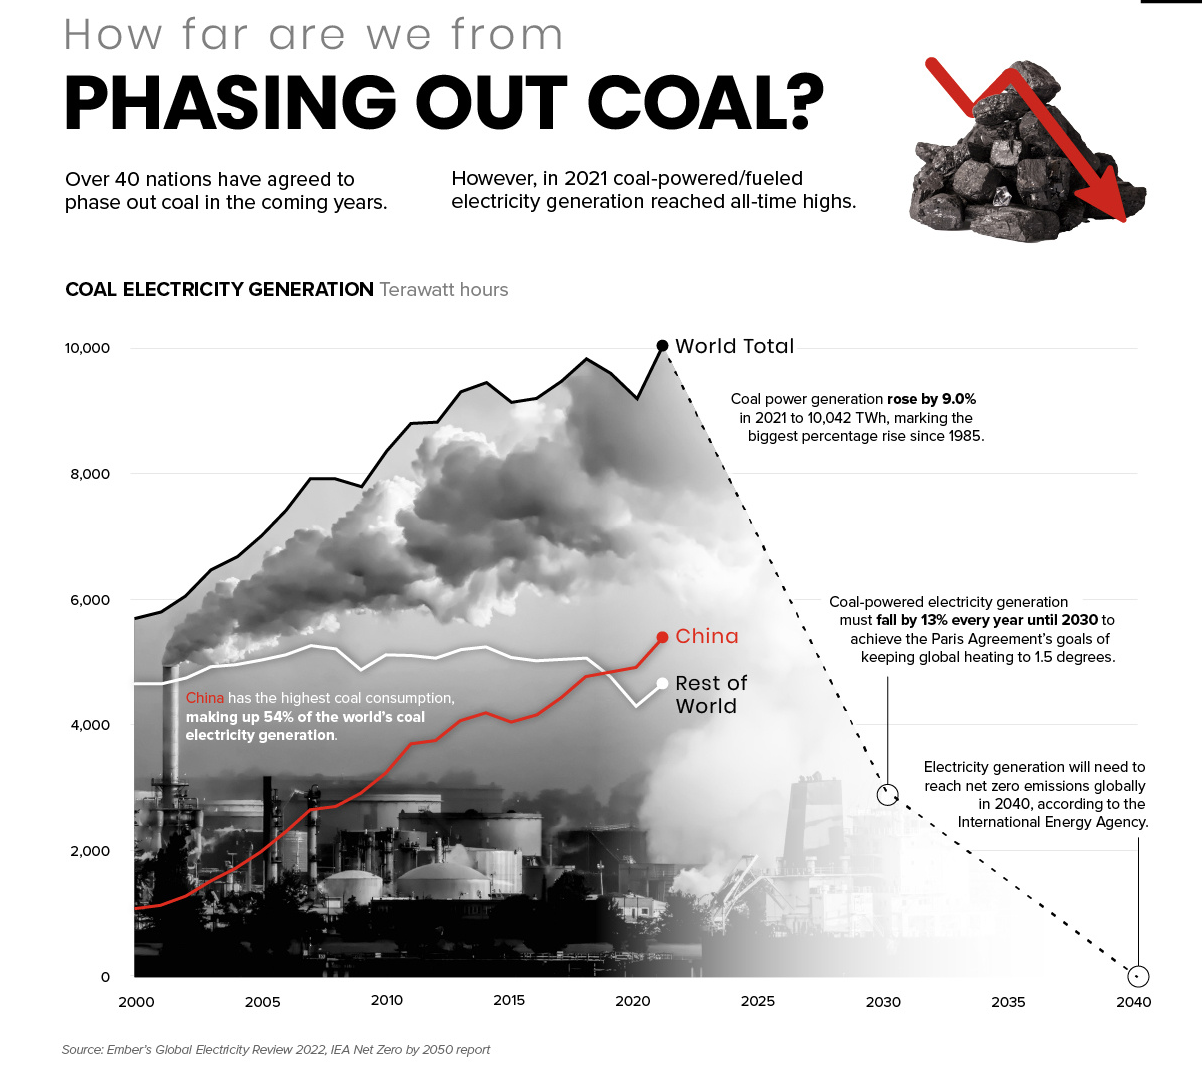 How Far Are We From Phasing Out Coal?